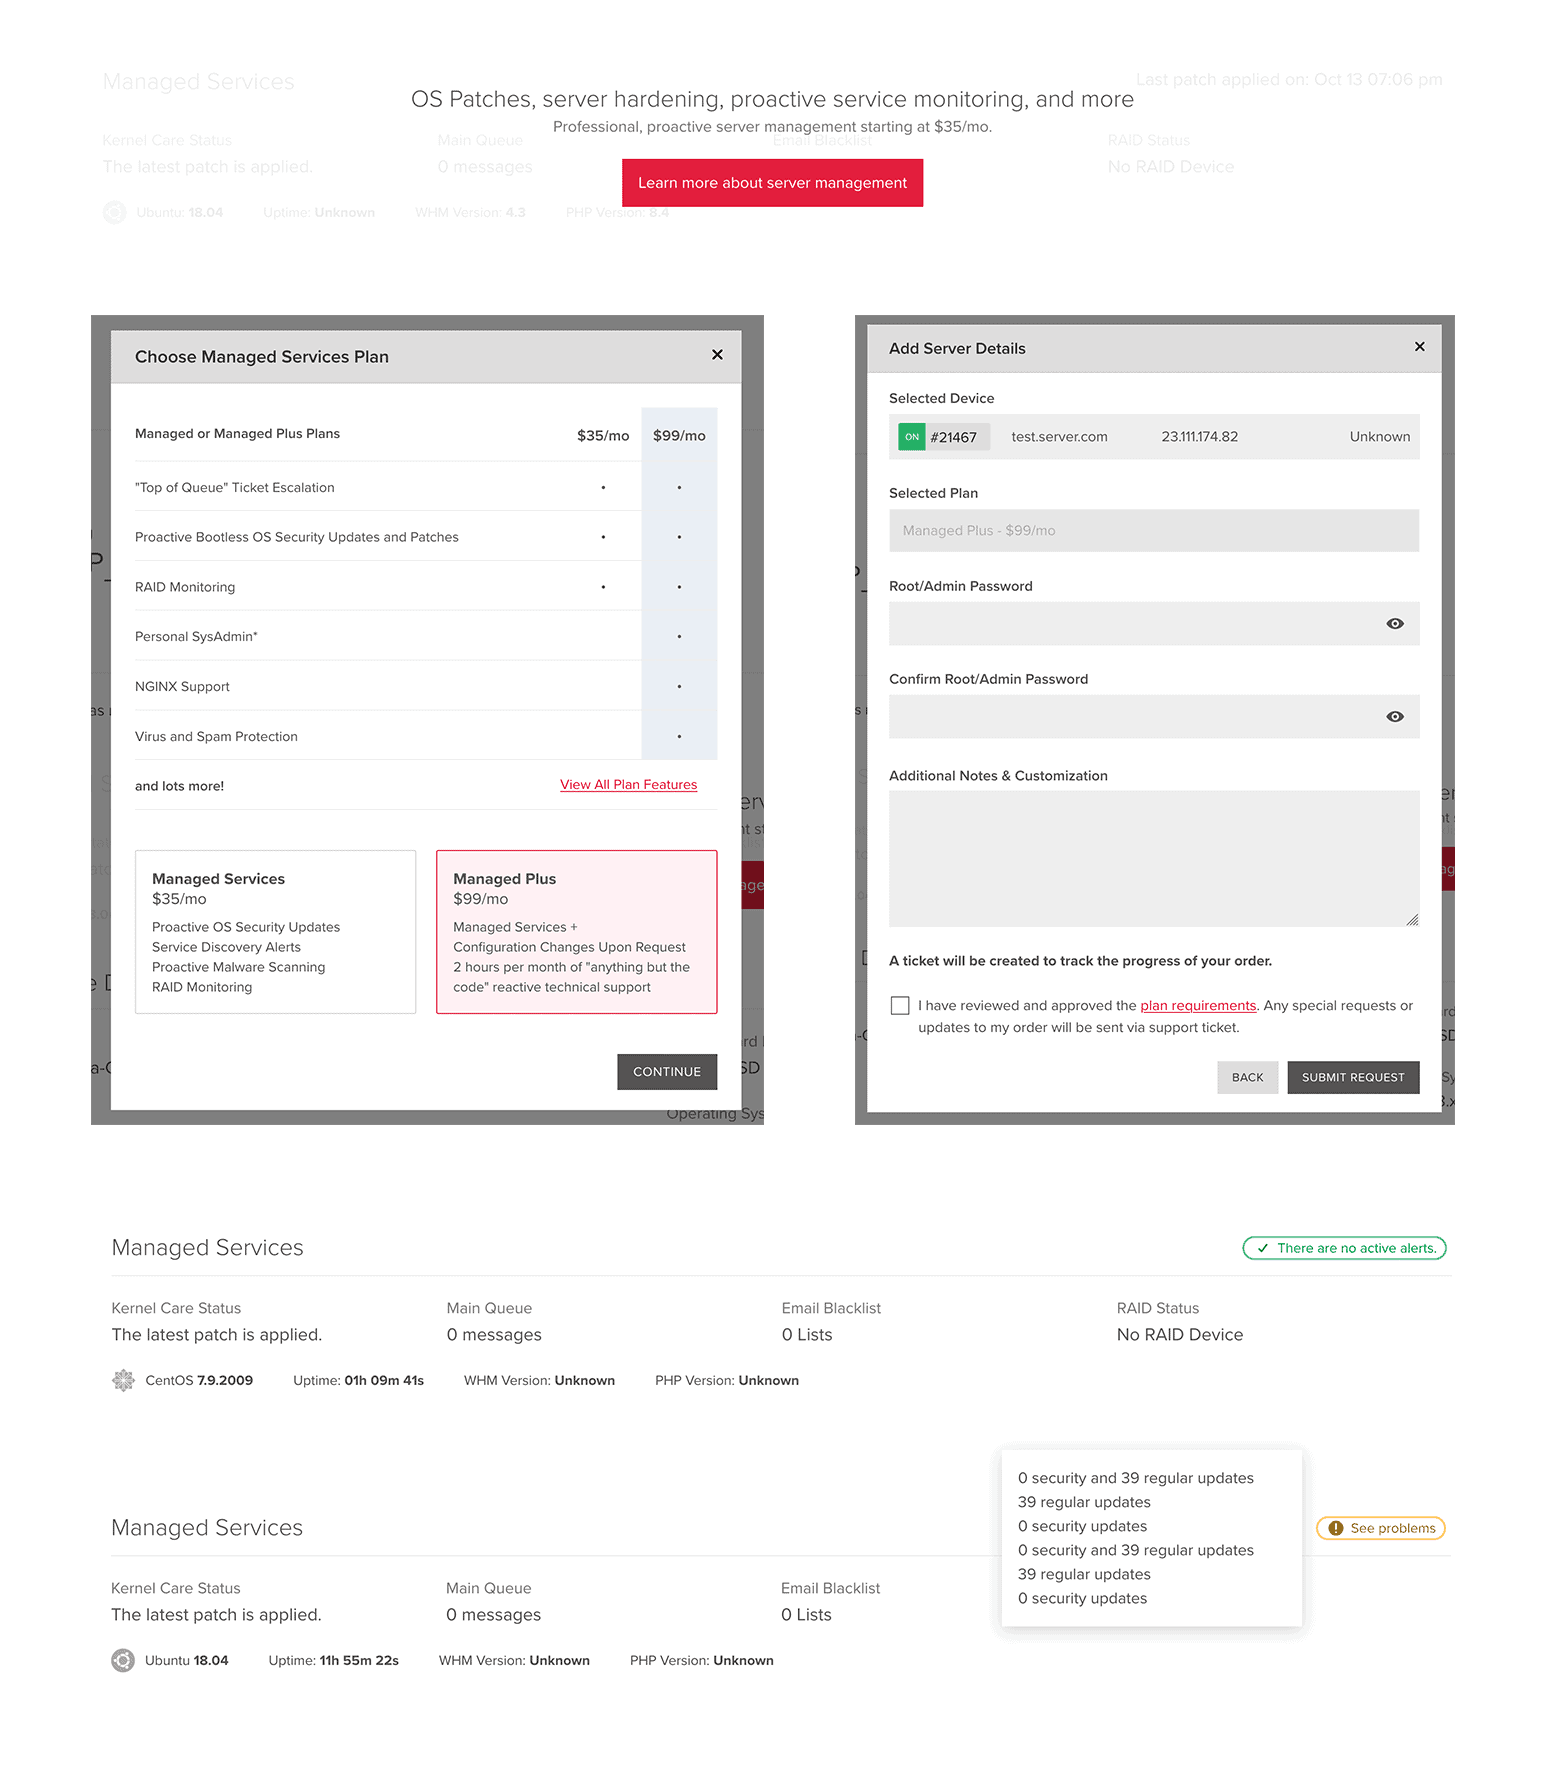 Screenshots showing the new Managed Services forms and stats bars